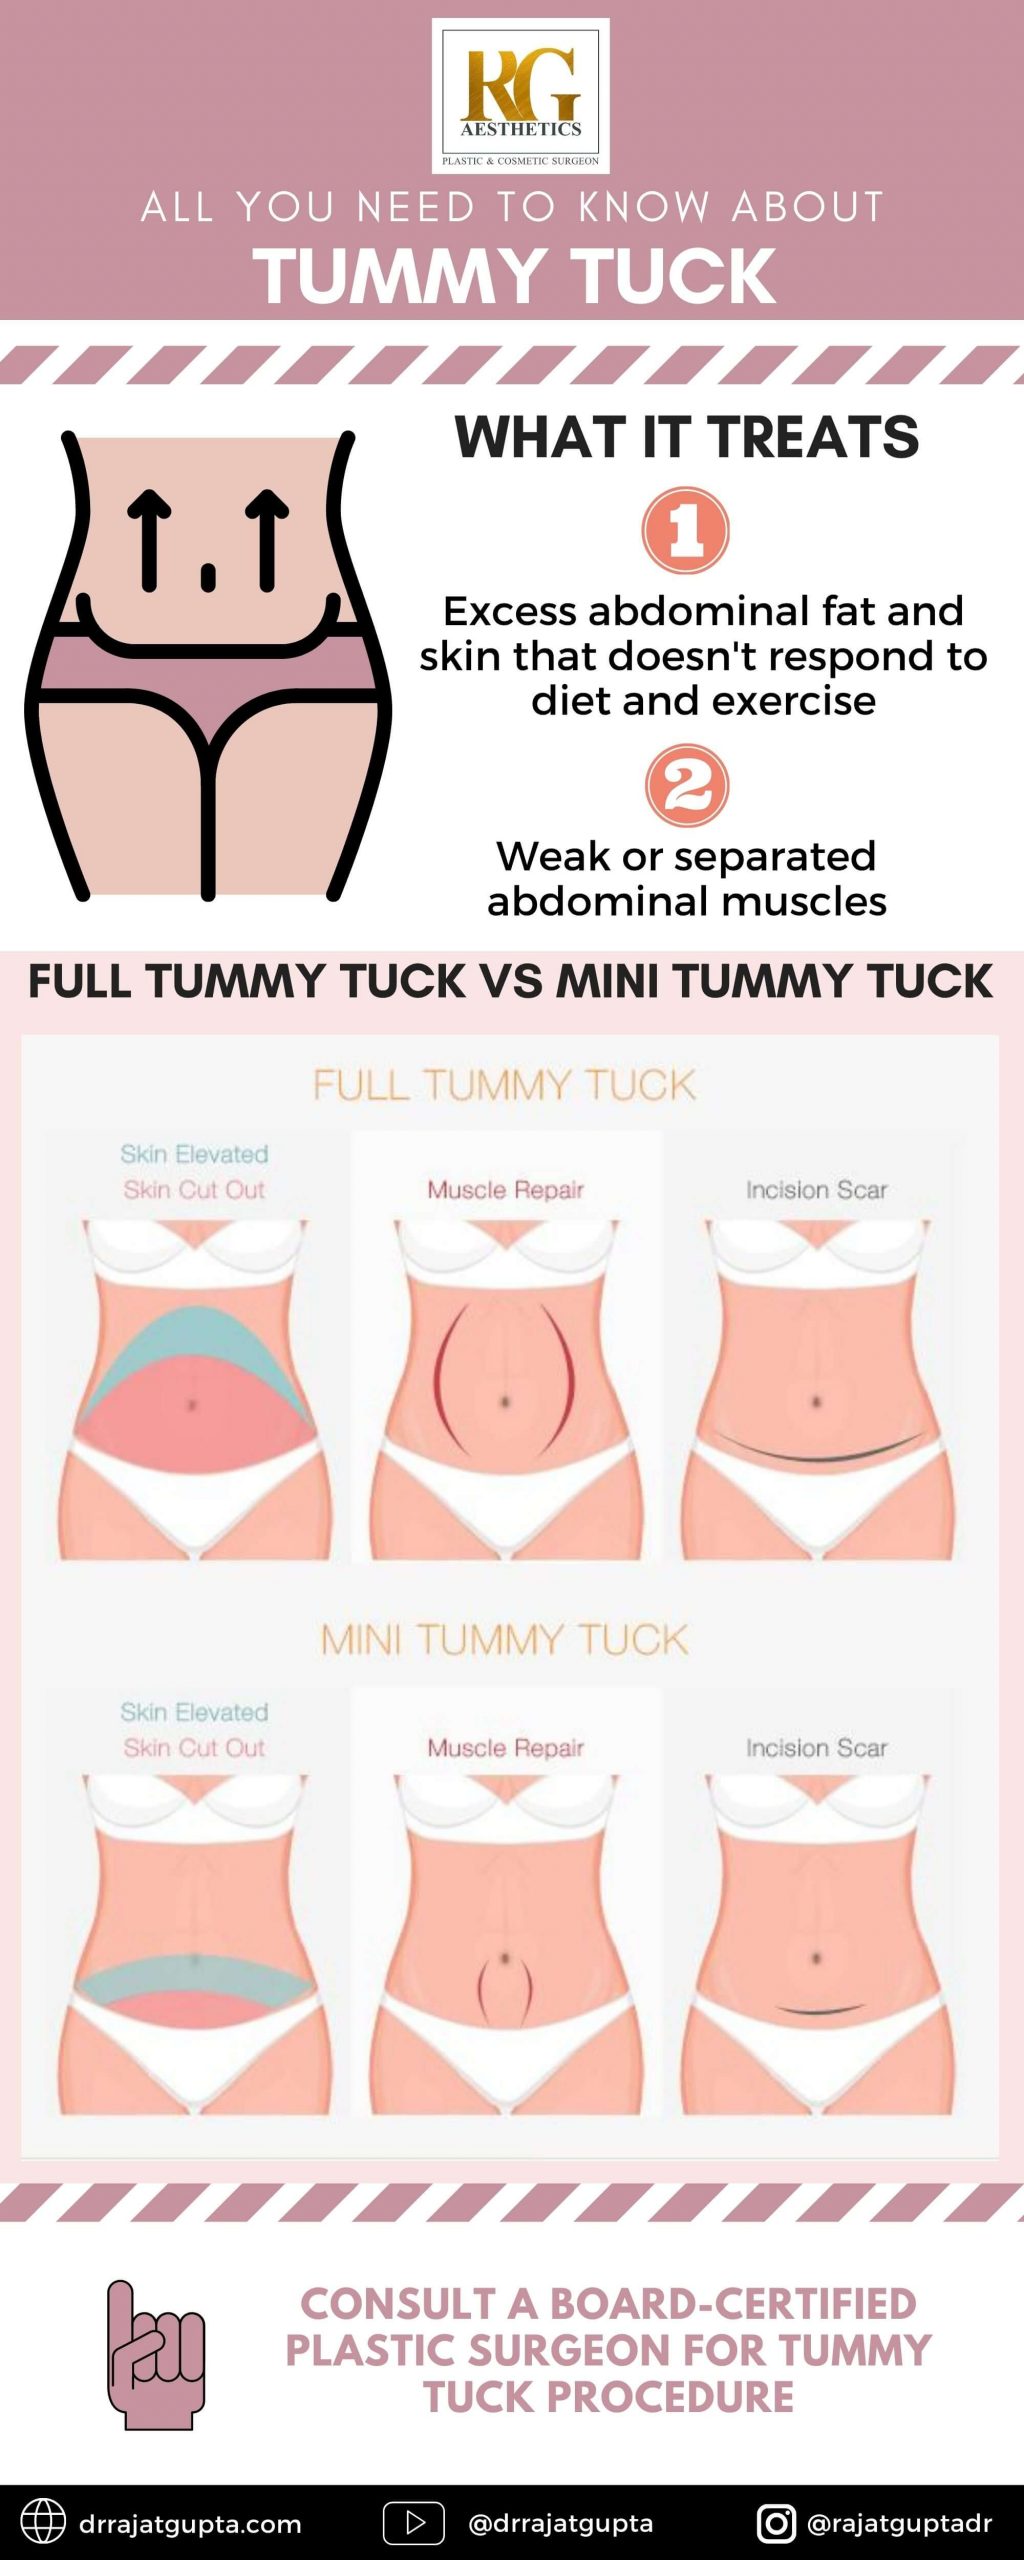 Tummy Tucks or Abdominoplasty The Complete Overview - Dr Rajat Gupta